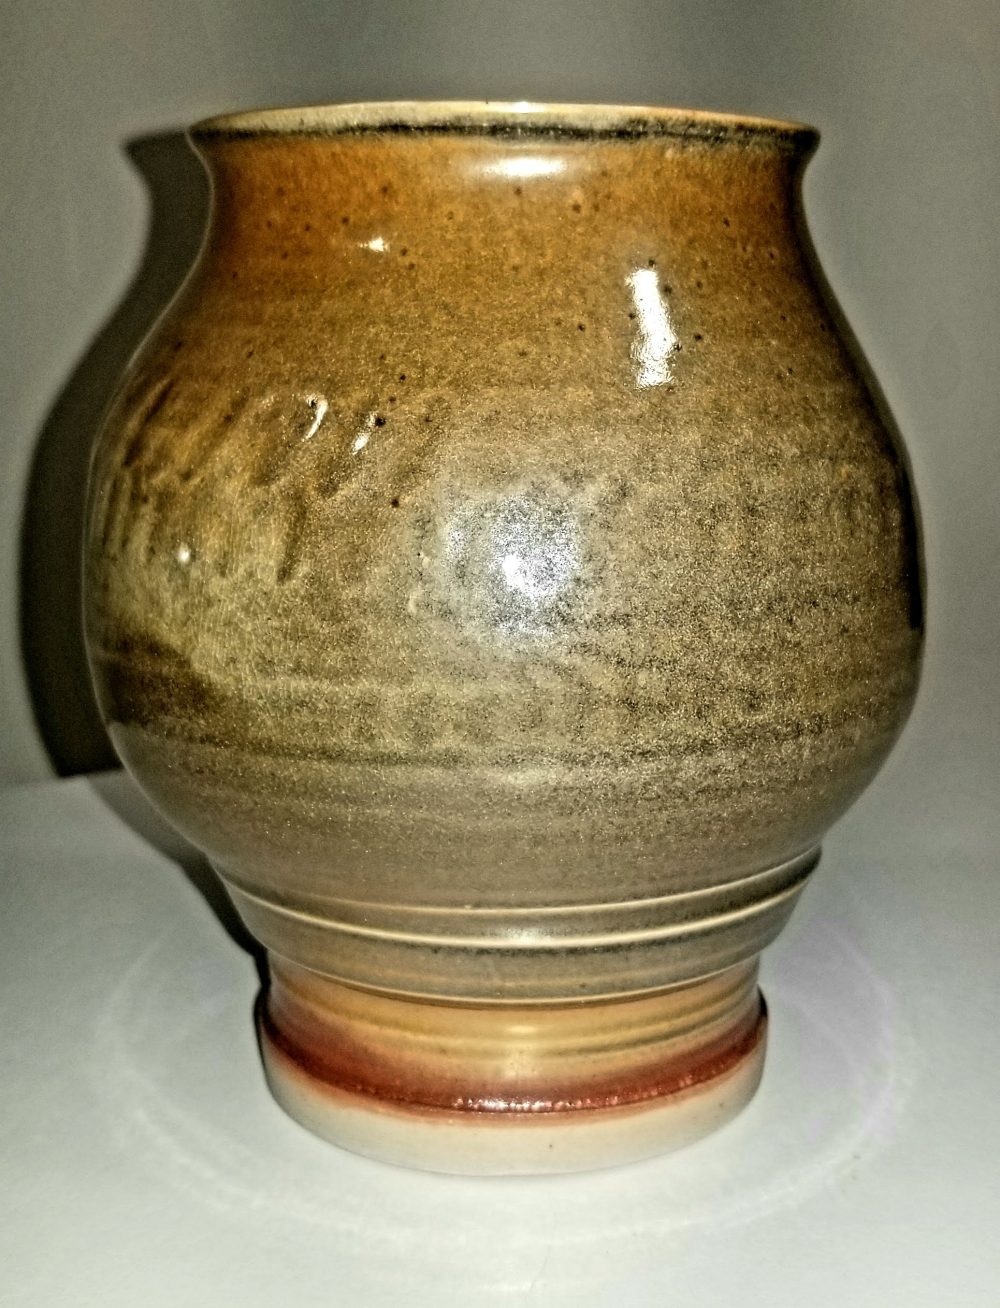 Leila Piazza, Chattered Shino Vase, 2020, mac-10 clay fired at cone 10, 6" x 5" x 5"